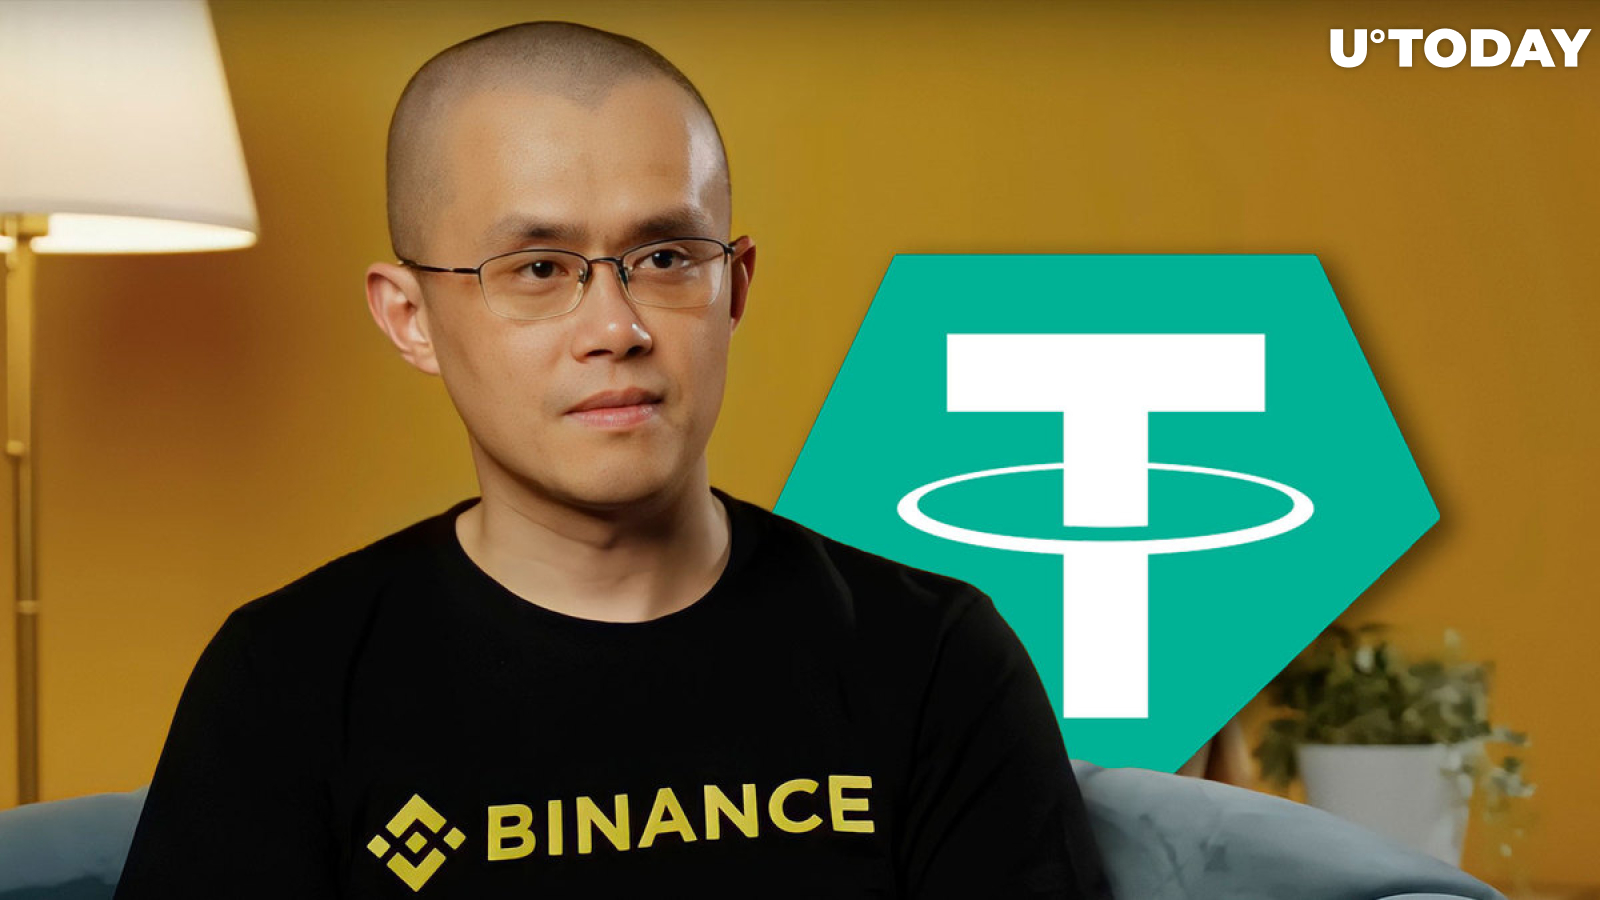 Binance and Tether Facing Heat from Congress